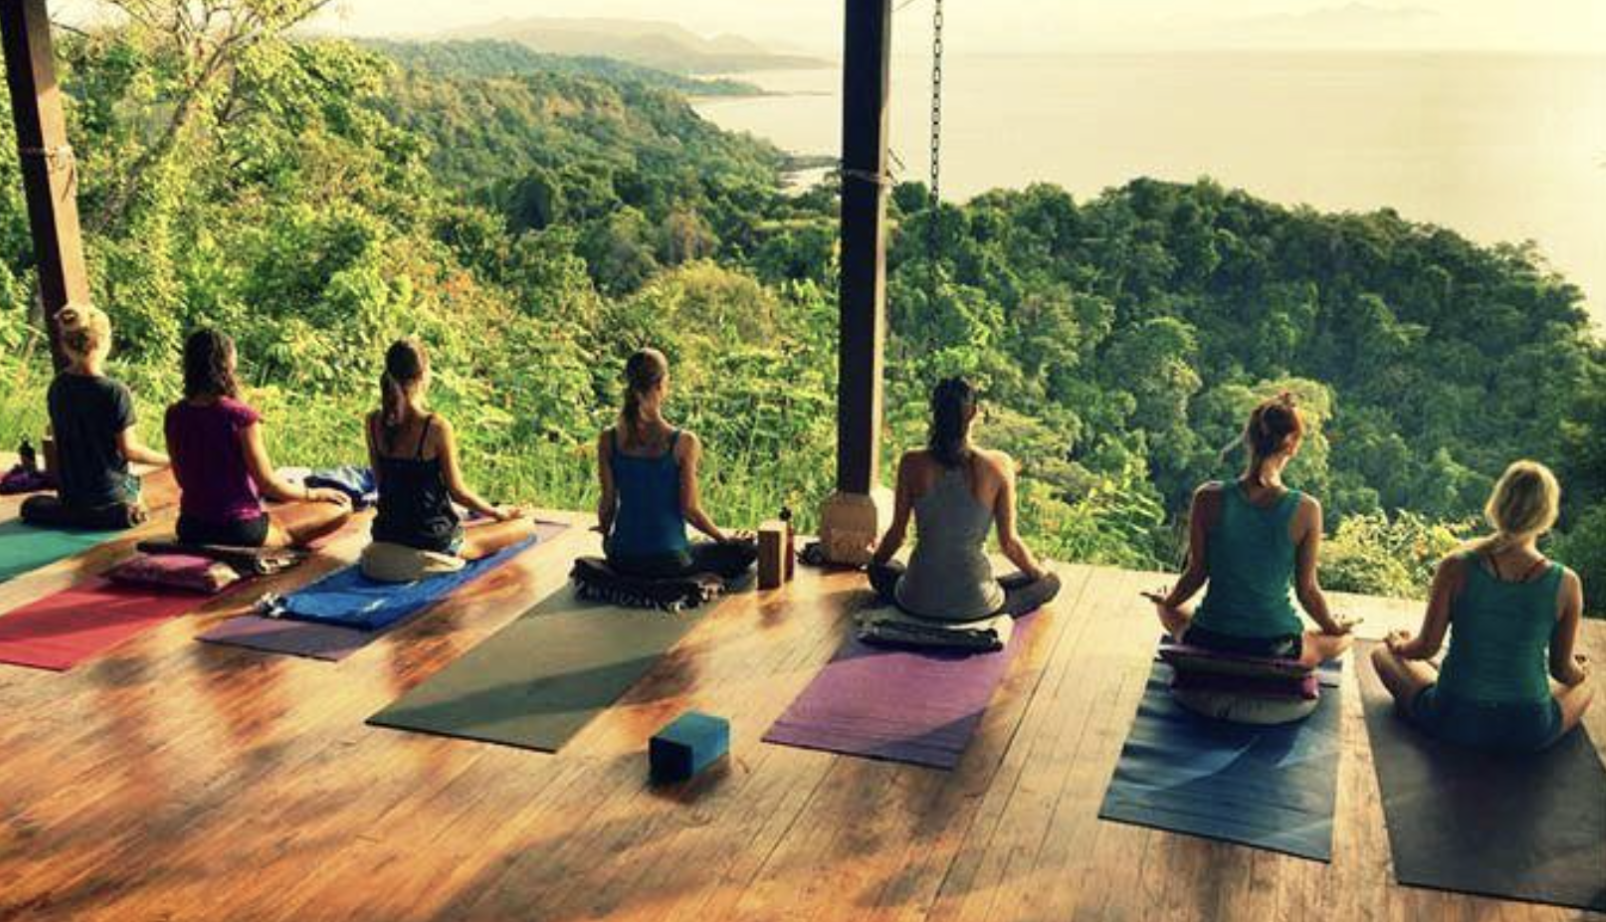 Costa Rica and the Wellness Tourism